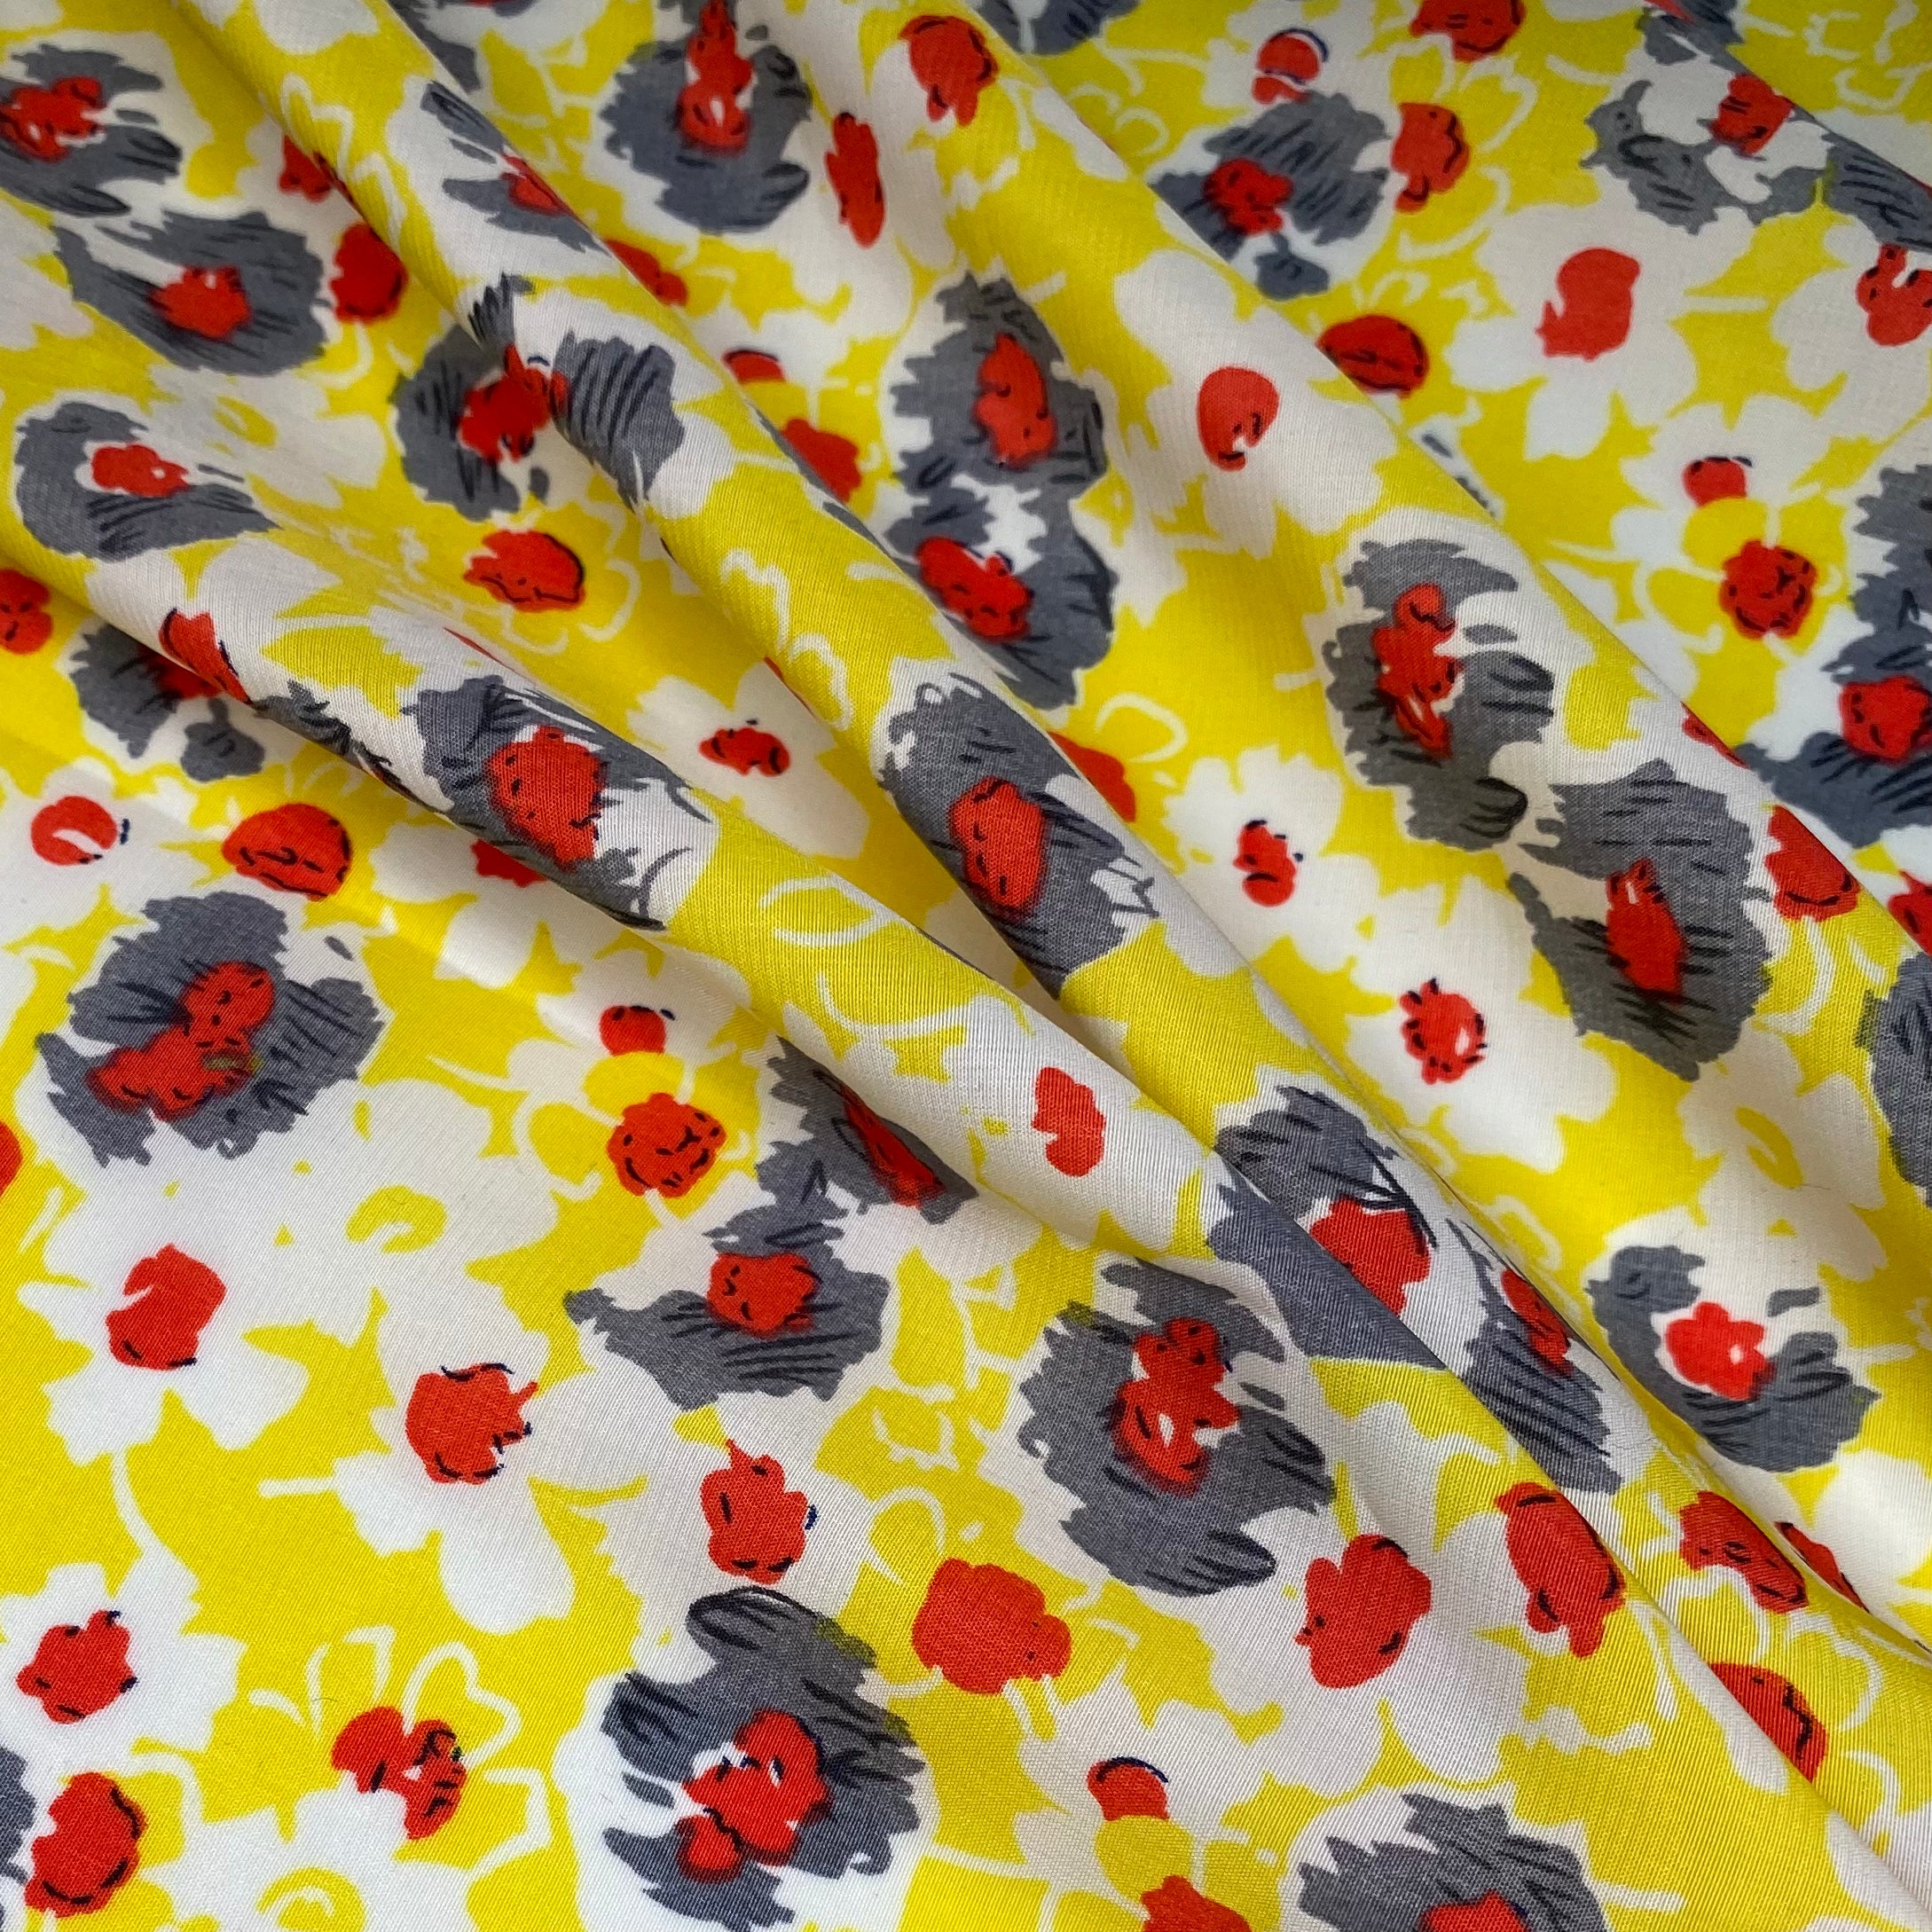 Floral Printed Polyester - 58” - Yellow/White/Grey/Red